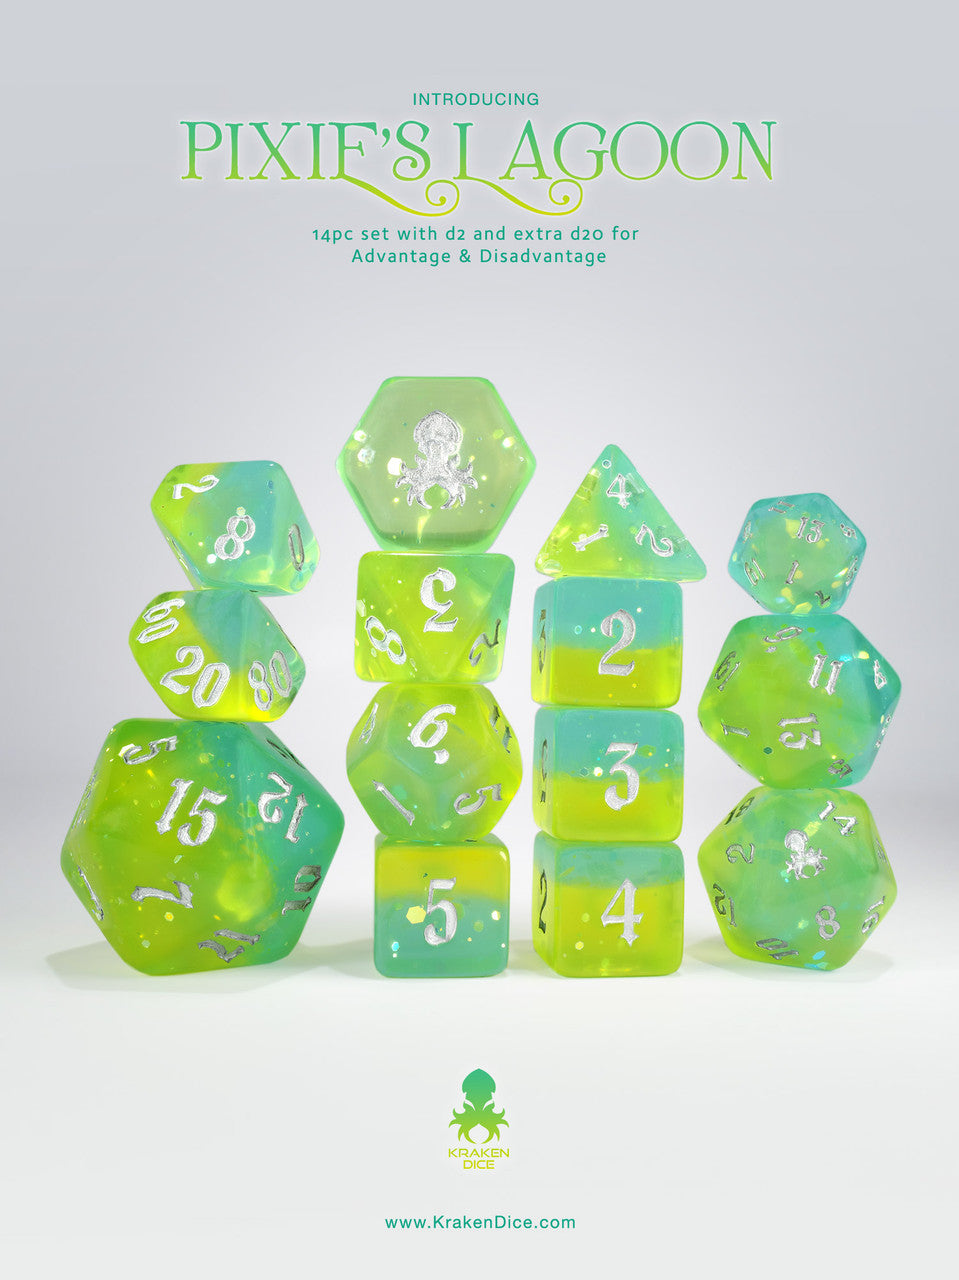 Pixie's Lagoon 14pc - Limited Run - Silver Ink Dice Set